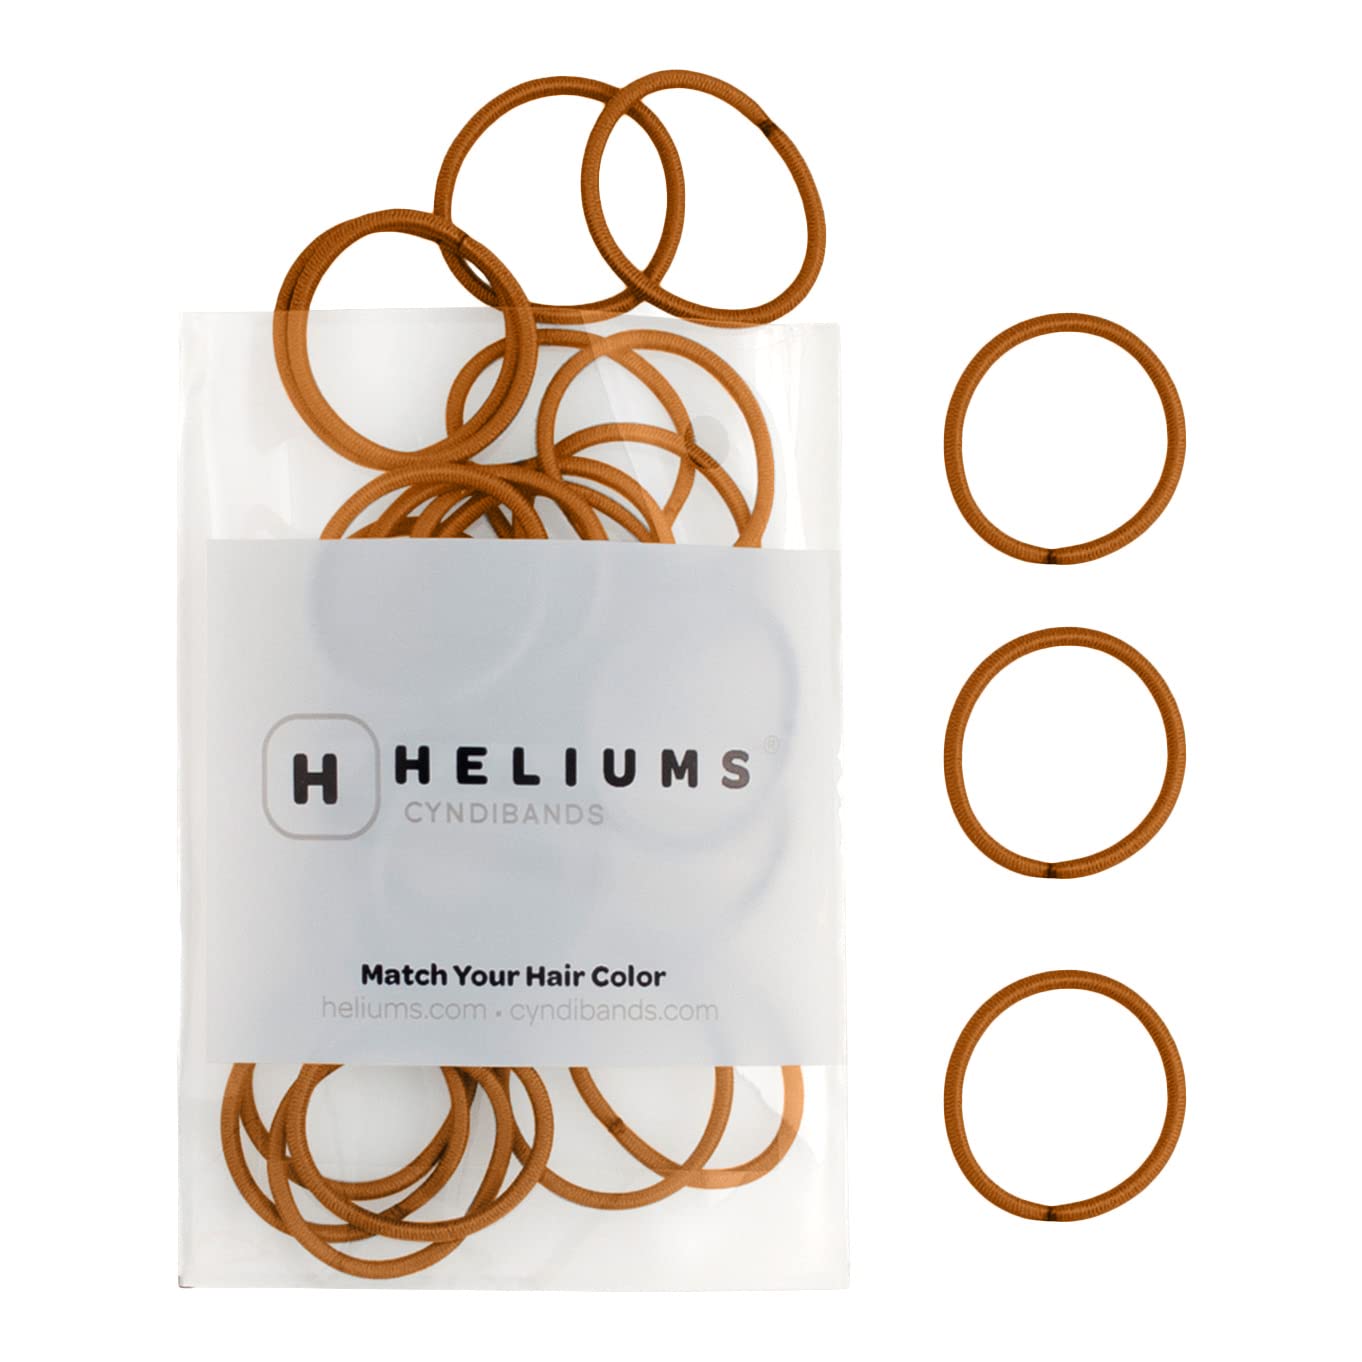 Heliums Ginger Mini Hair Elastics - 2mm Hair Accessories For Women & Kids - Non-Snag Fabric Bands for Fine Hair - Mini Hair Ties for Small Ponytails, Buns & Braids - Natural Colors & Shades - image 1 of 3